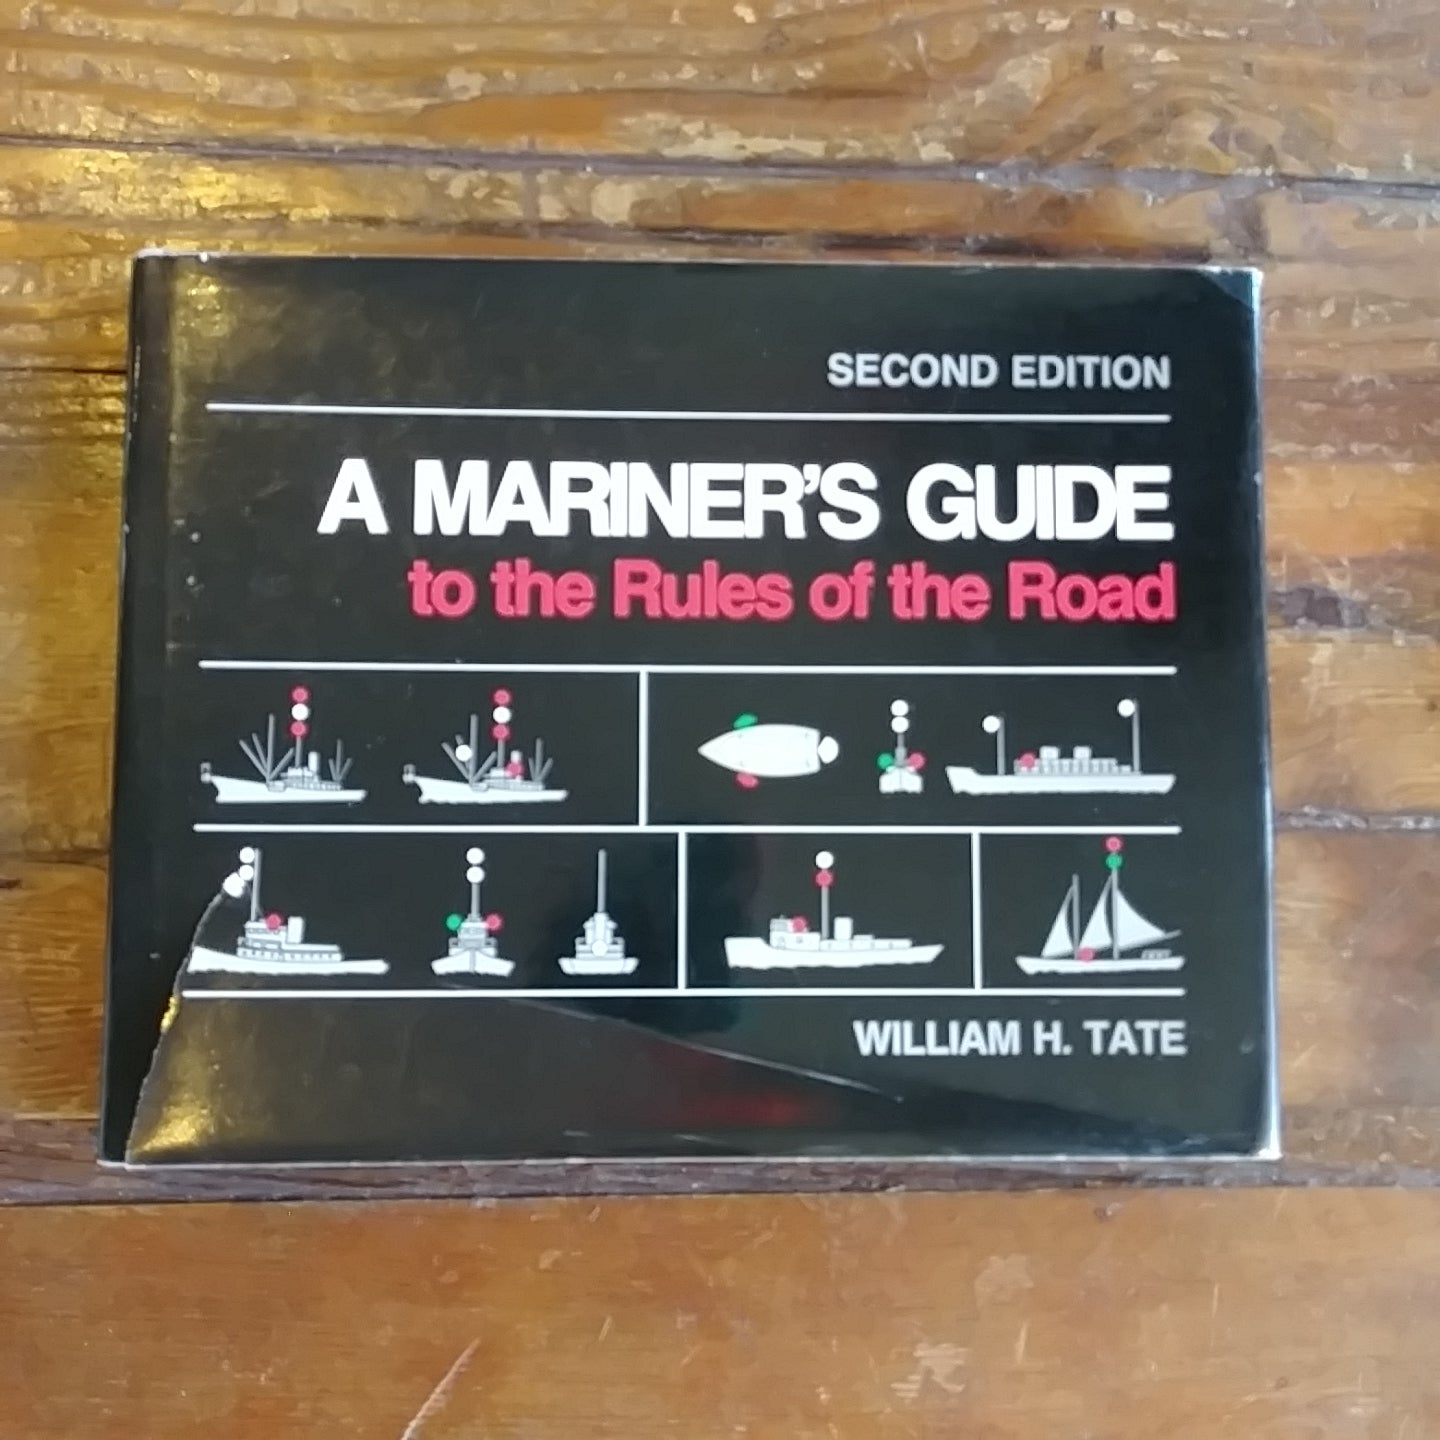 Book, "A Mariner's Guide to the Rules of the Road"